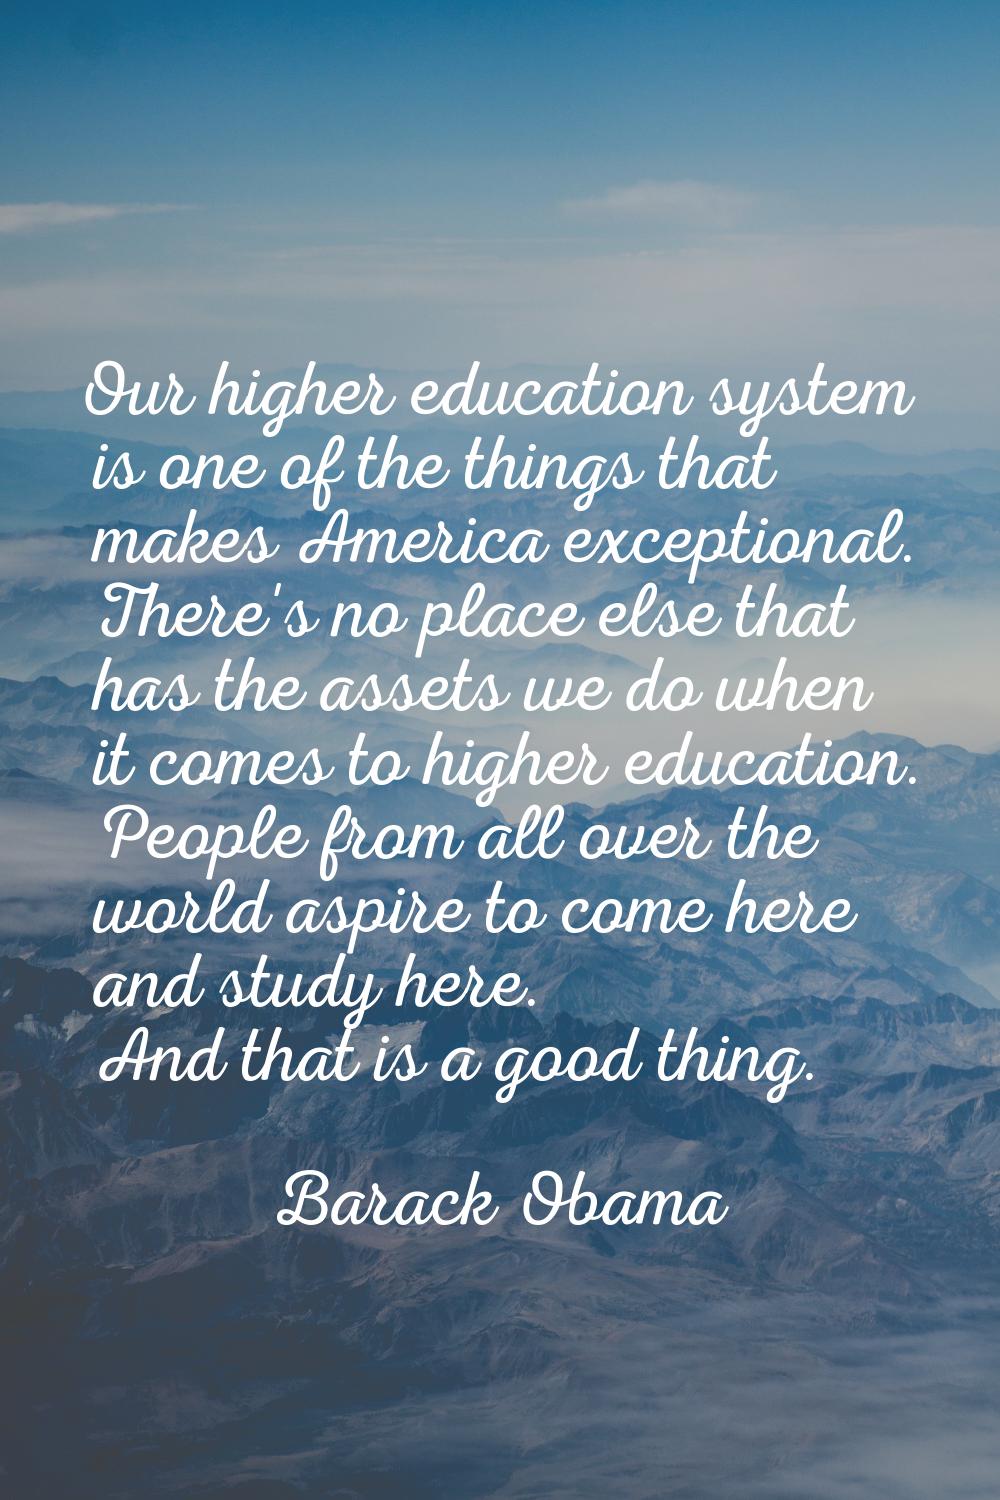 Our higher education system is one of the things that makes America exceptional. There's no place e